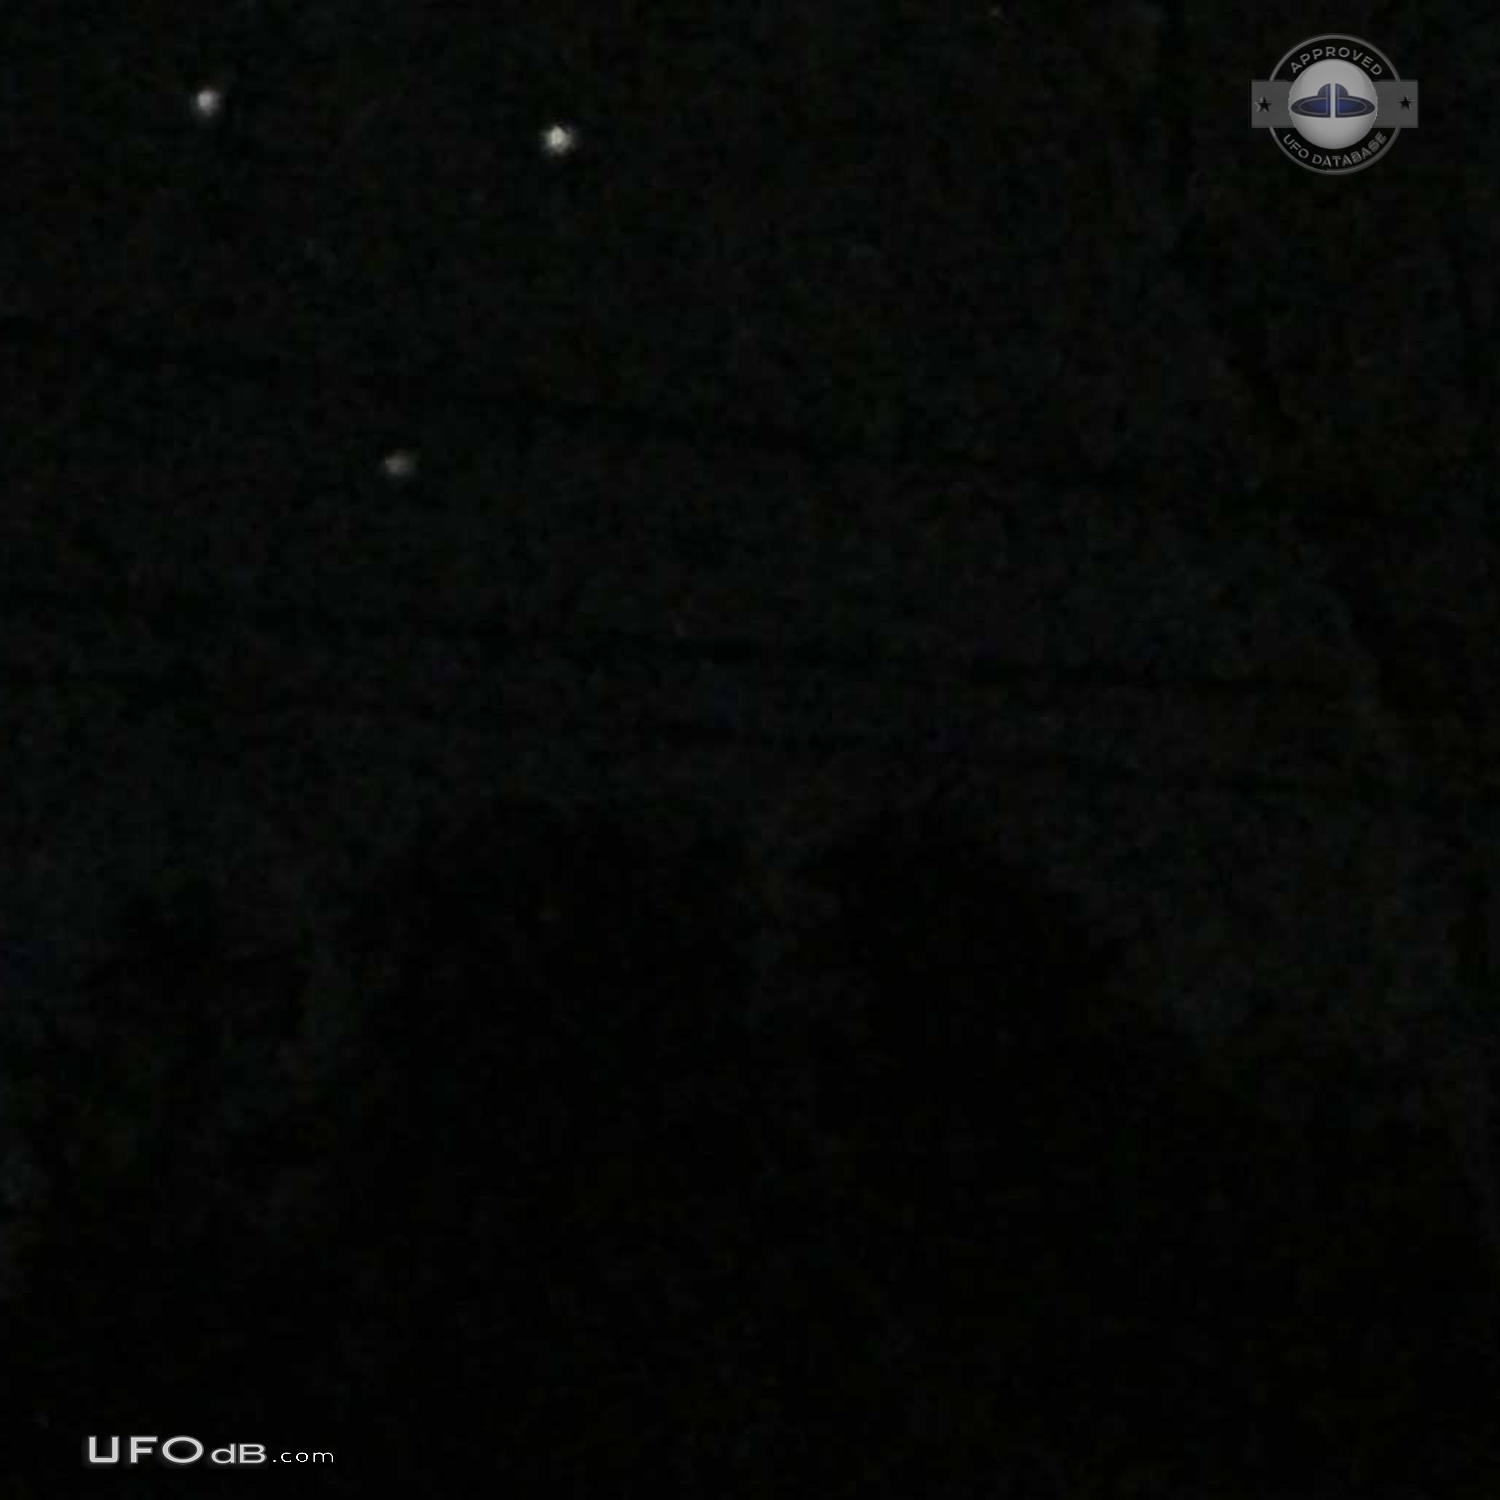 Three slowly moving UFOs in shape of inverted triangle Alabama 2016 UFO Picture #774-3